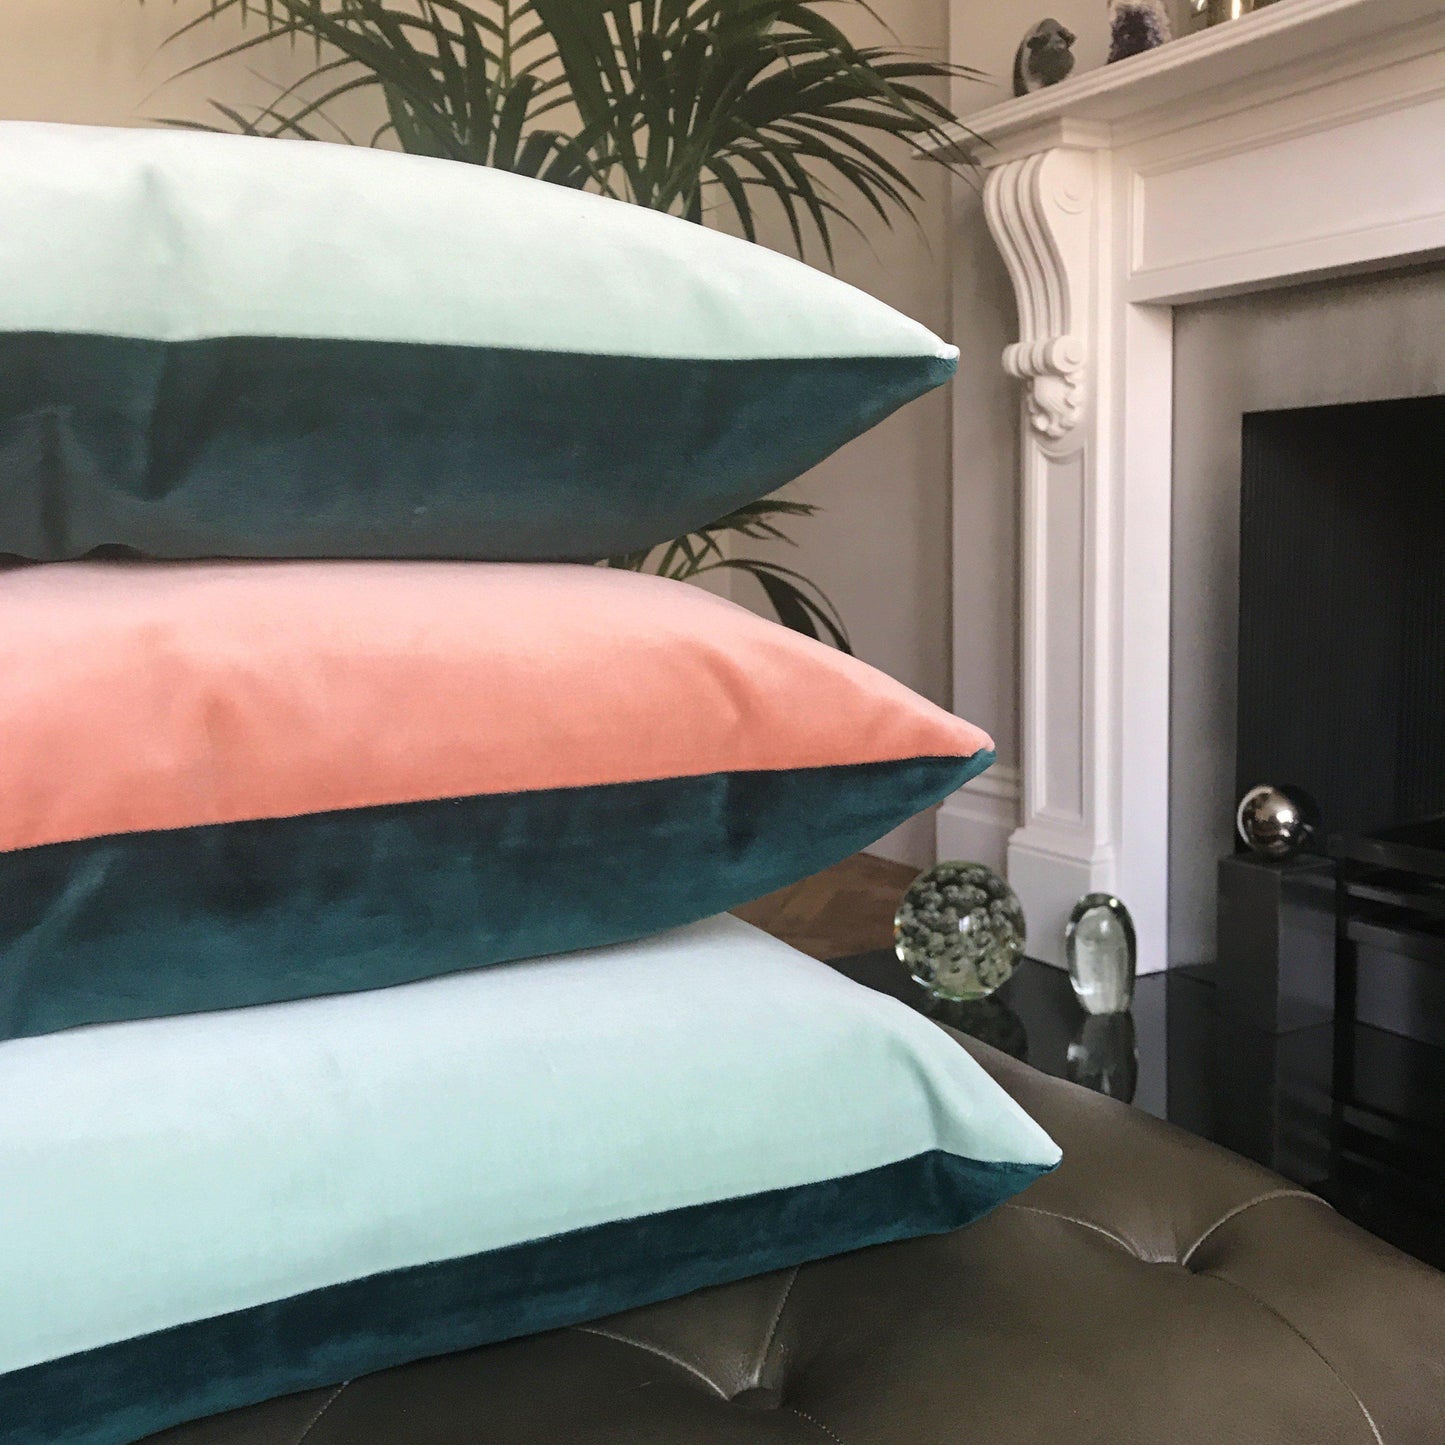 teal sofa cushions with duck egg by luxe 39